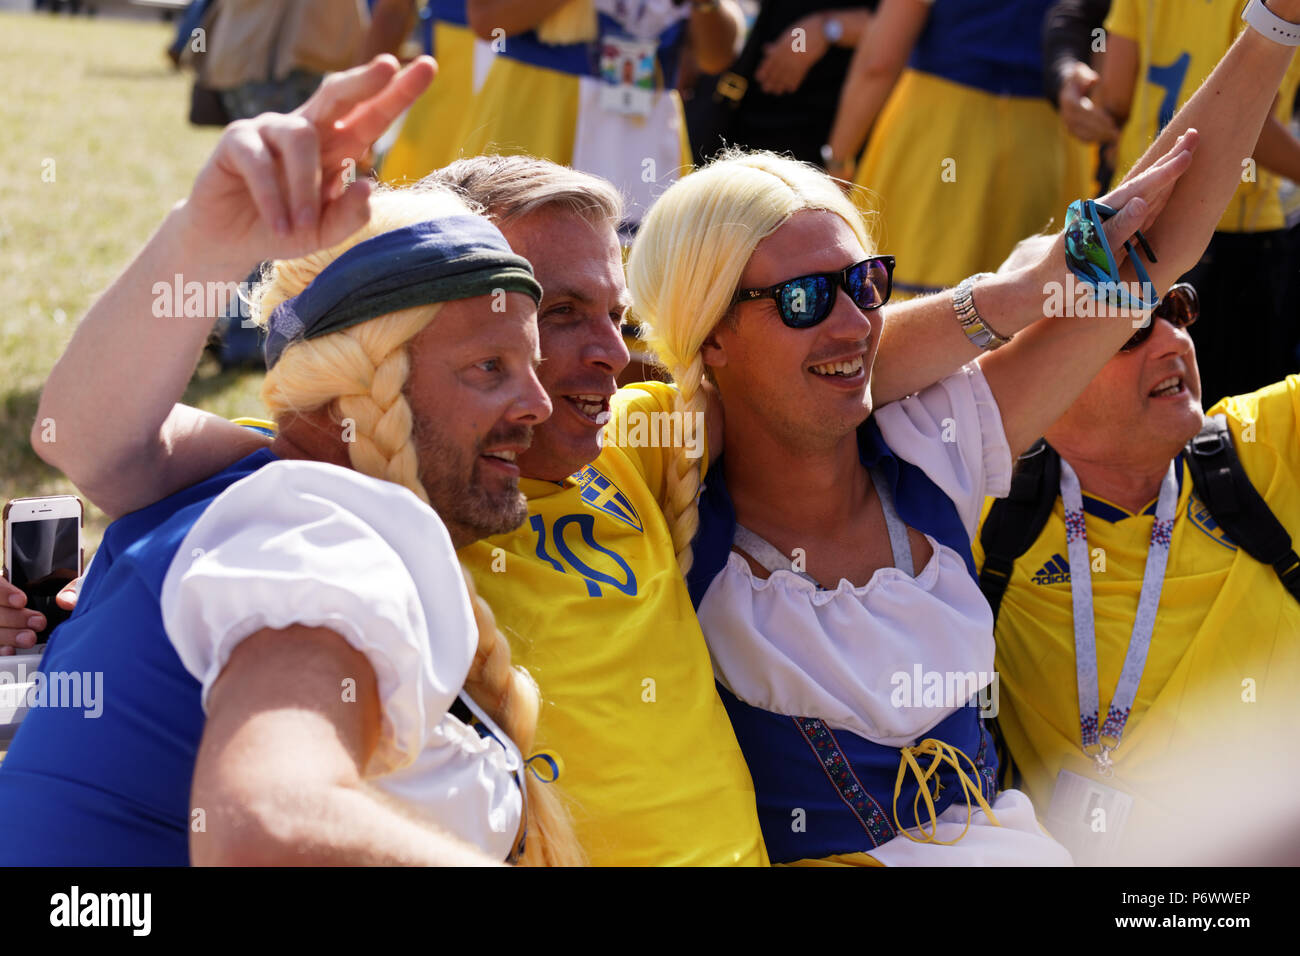 St. Petersburg, Russia, 3rd July, 2018. Swedish football fans before the 1/8 final match of FIFA World Cup Russia 2018 Sweden vs Switzerland Stock Photo